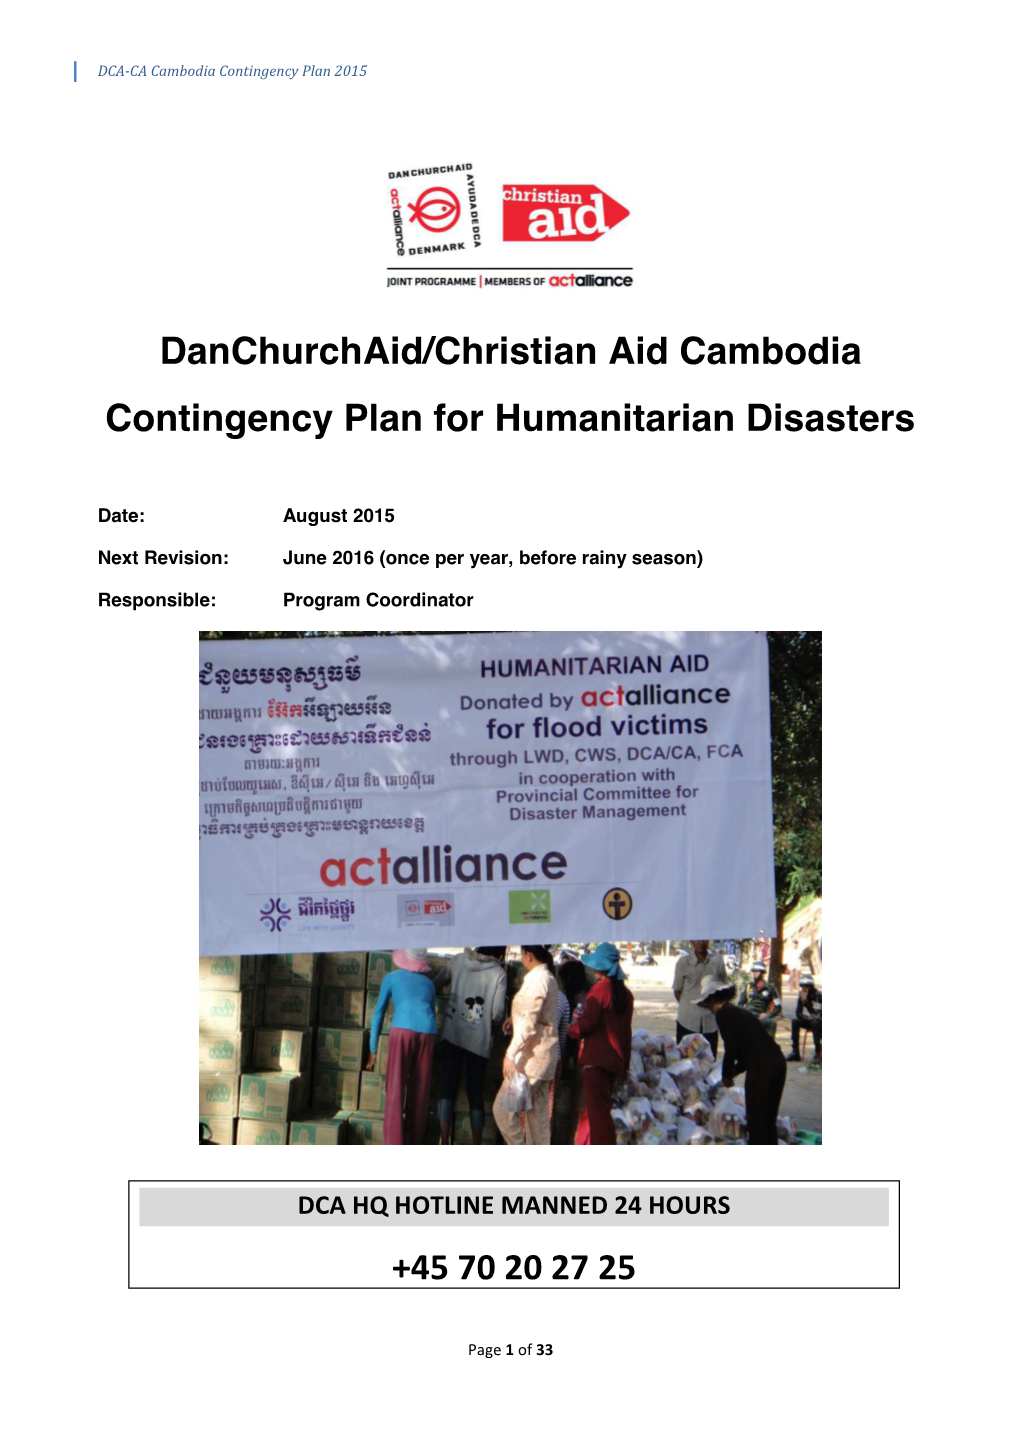 Danchurchaid/Christian Aid Cambodia Contingency Plan for Humanitarian Disasters